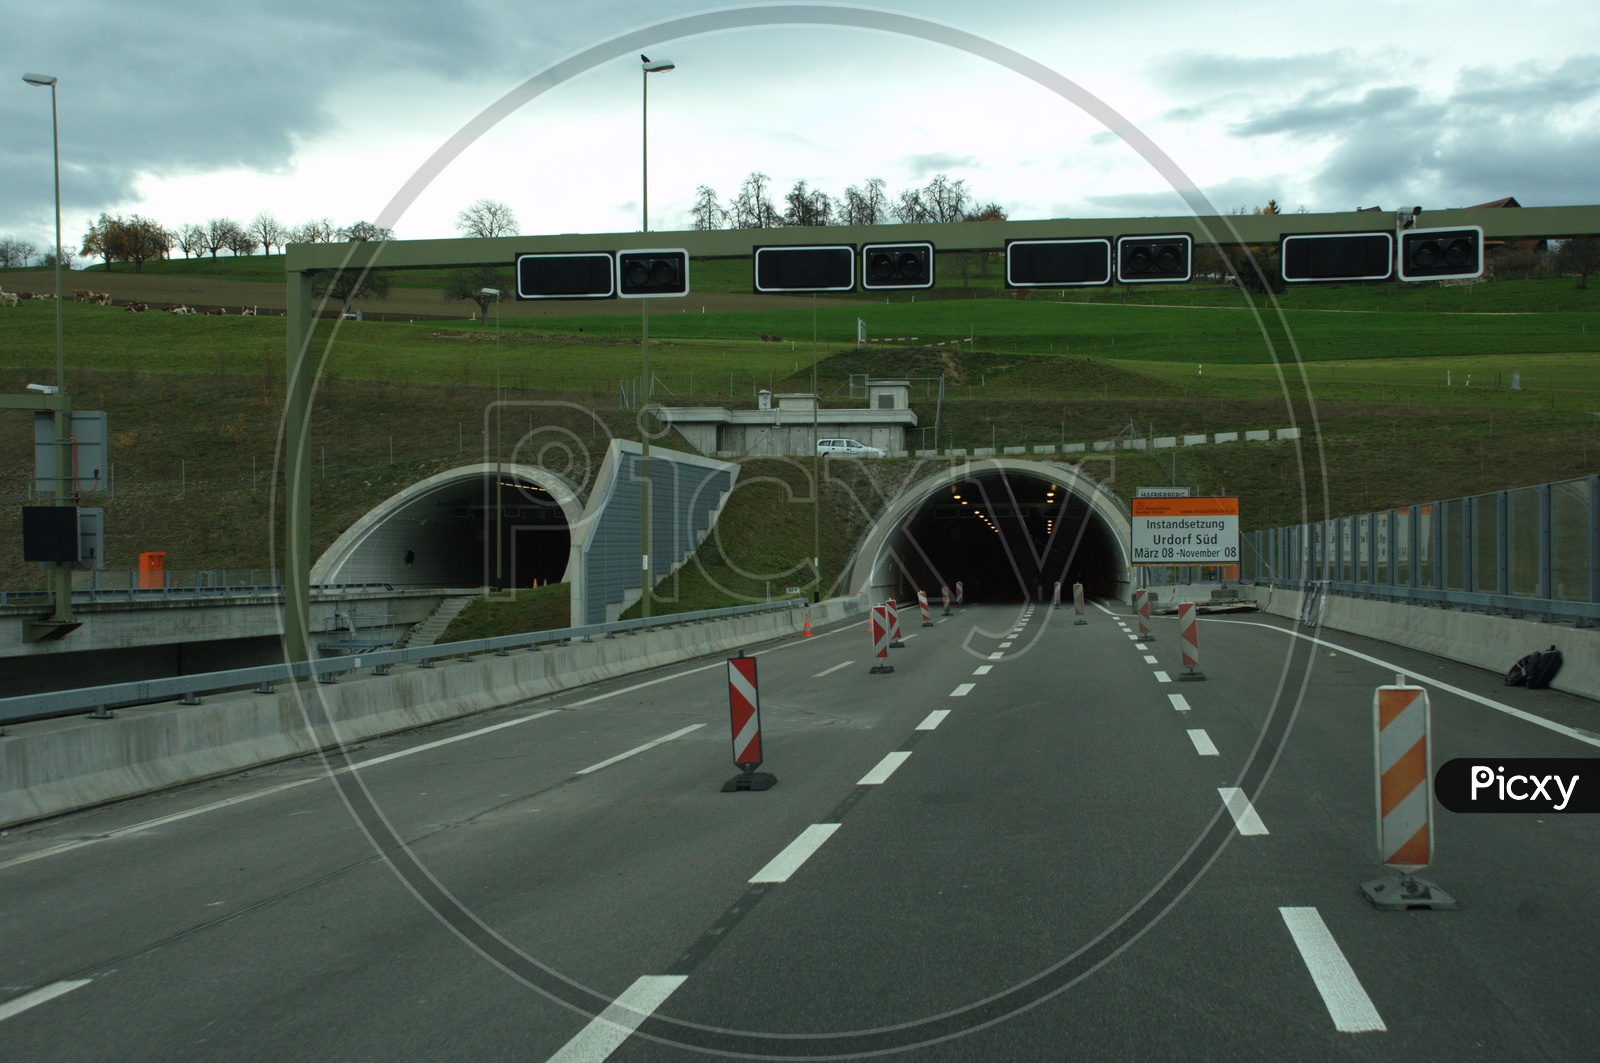 View of Tunnel along the roadway